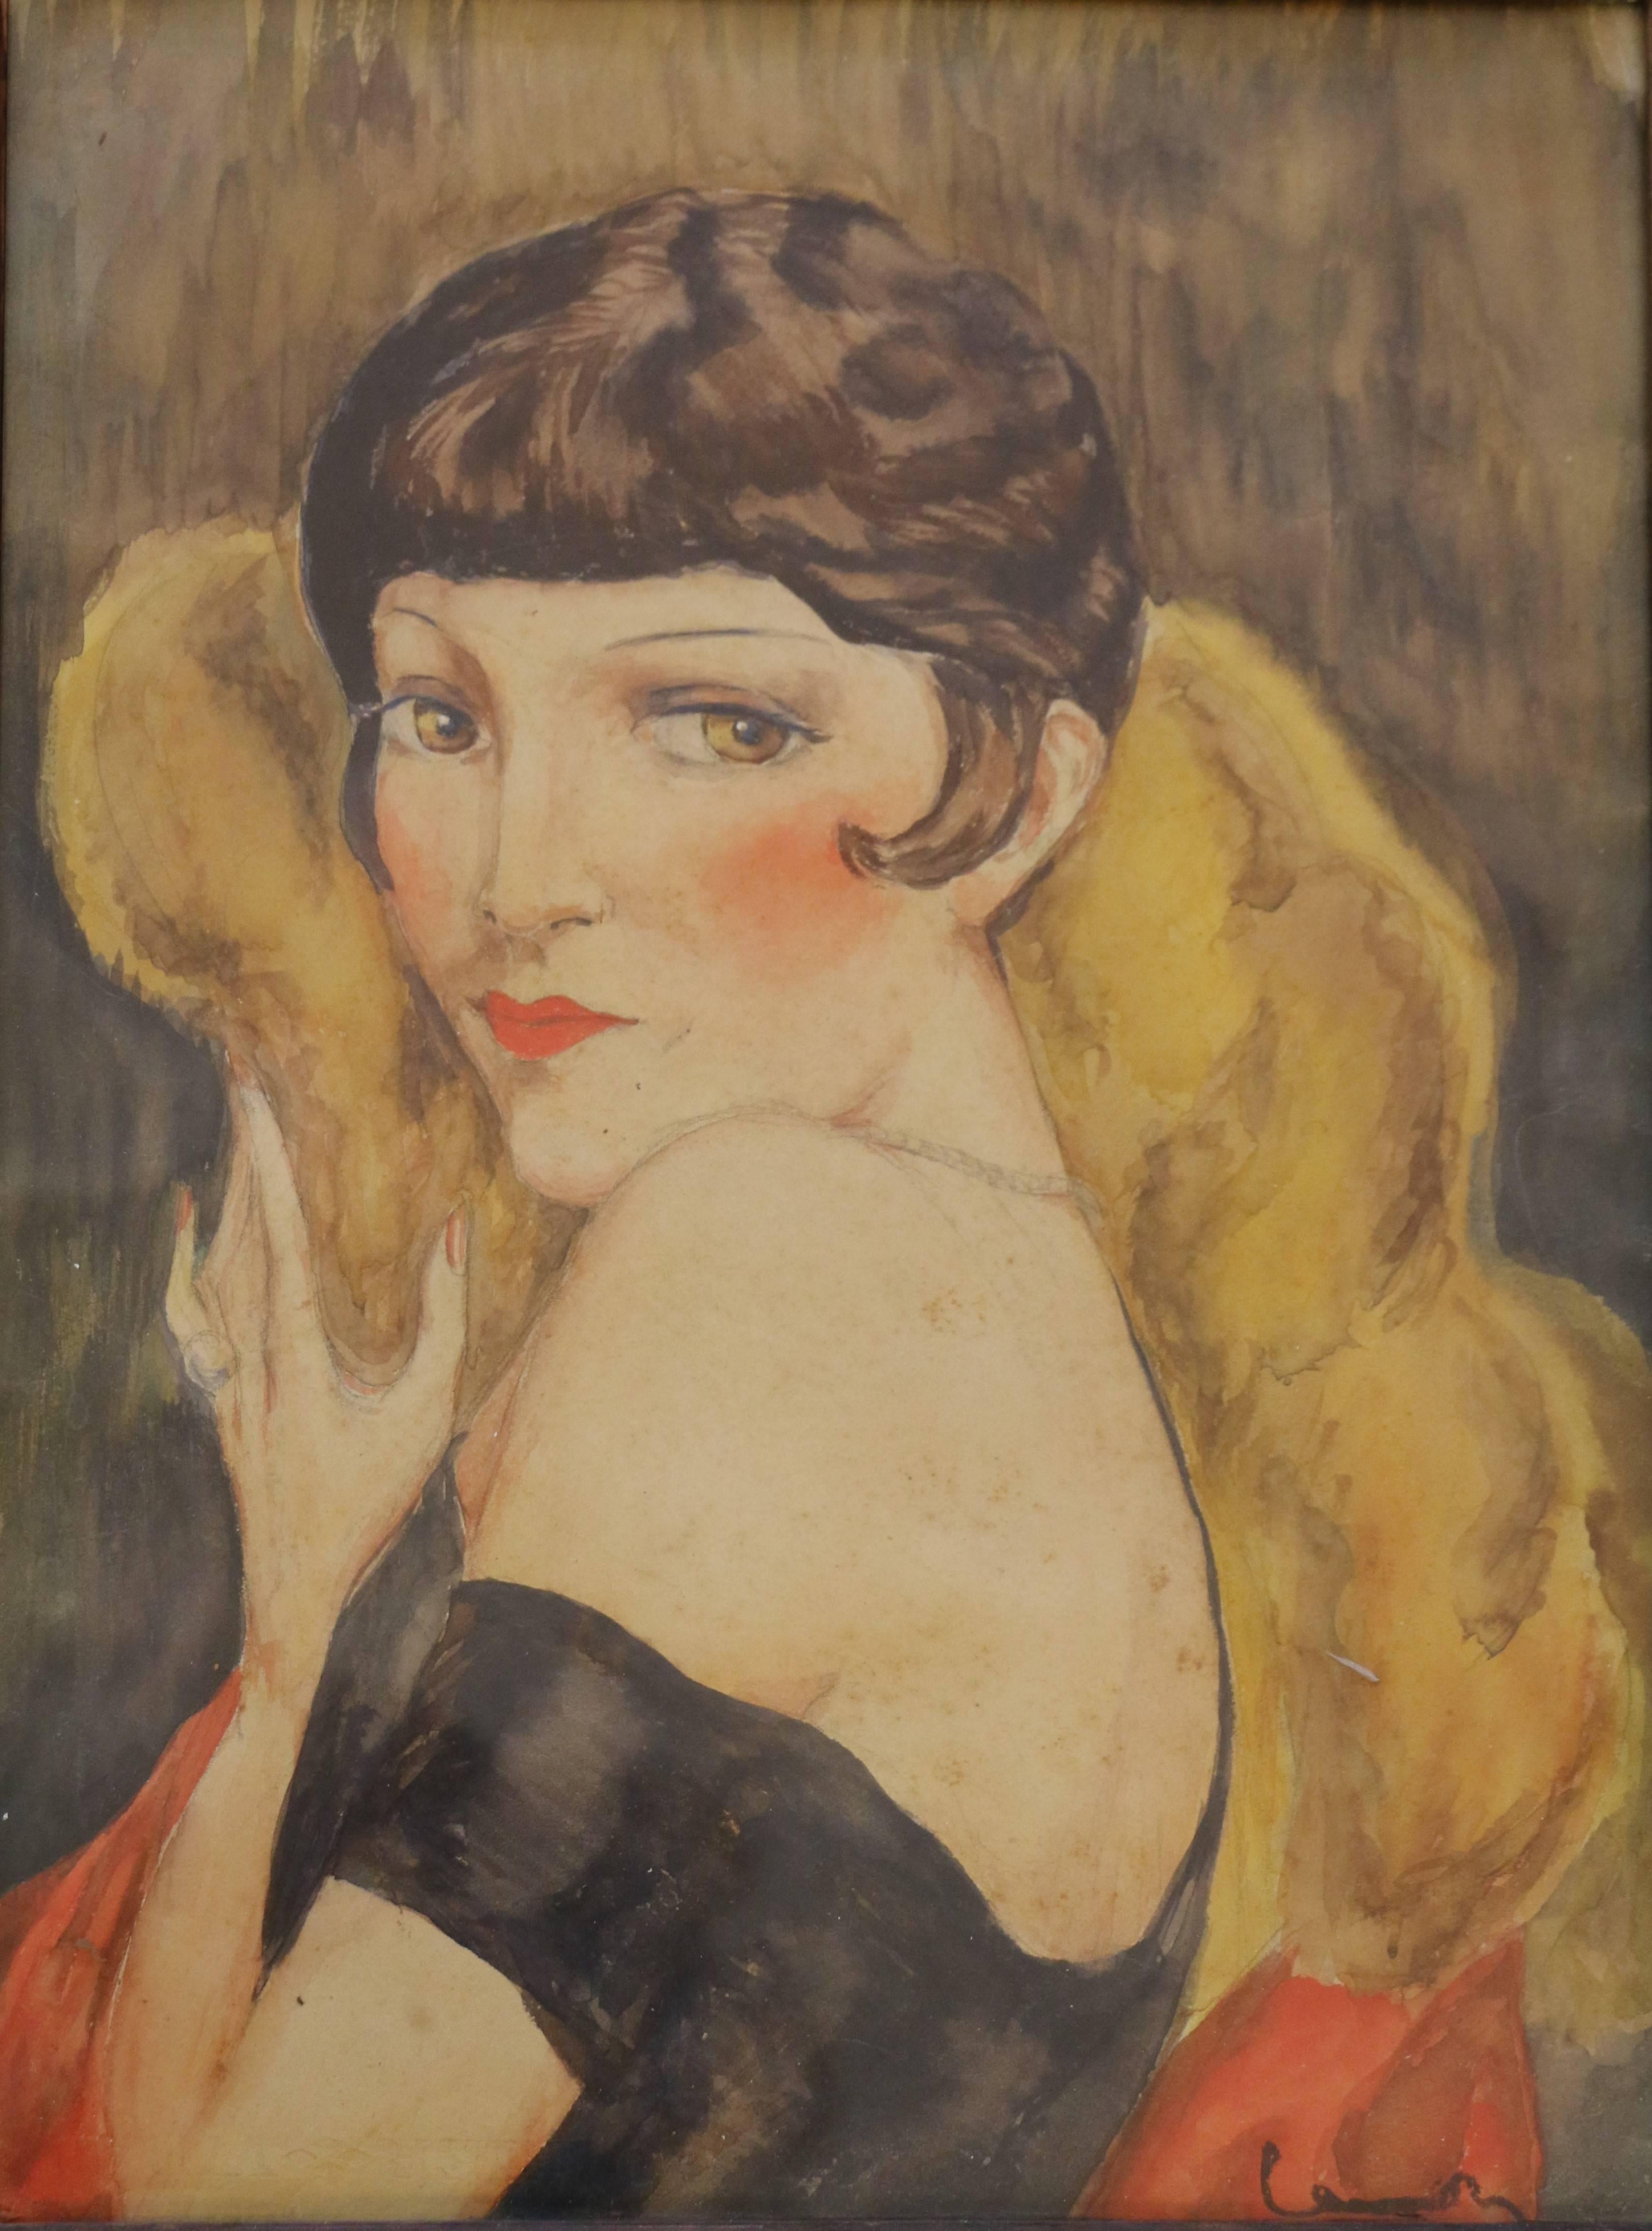 Portrait of Kiki de Montparnasse attributed to Charles Camoin (1879-1965). This watercolor on paper bears a 